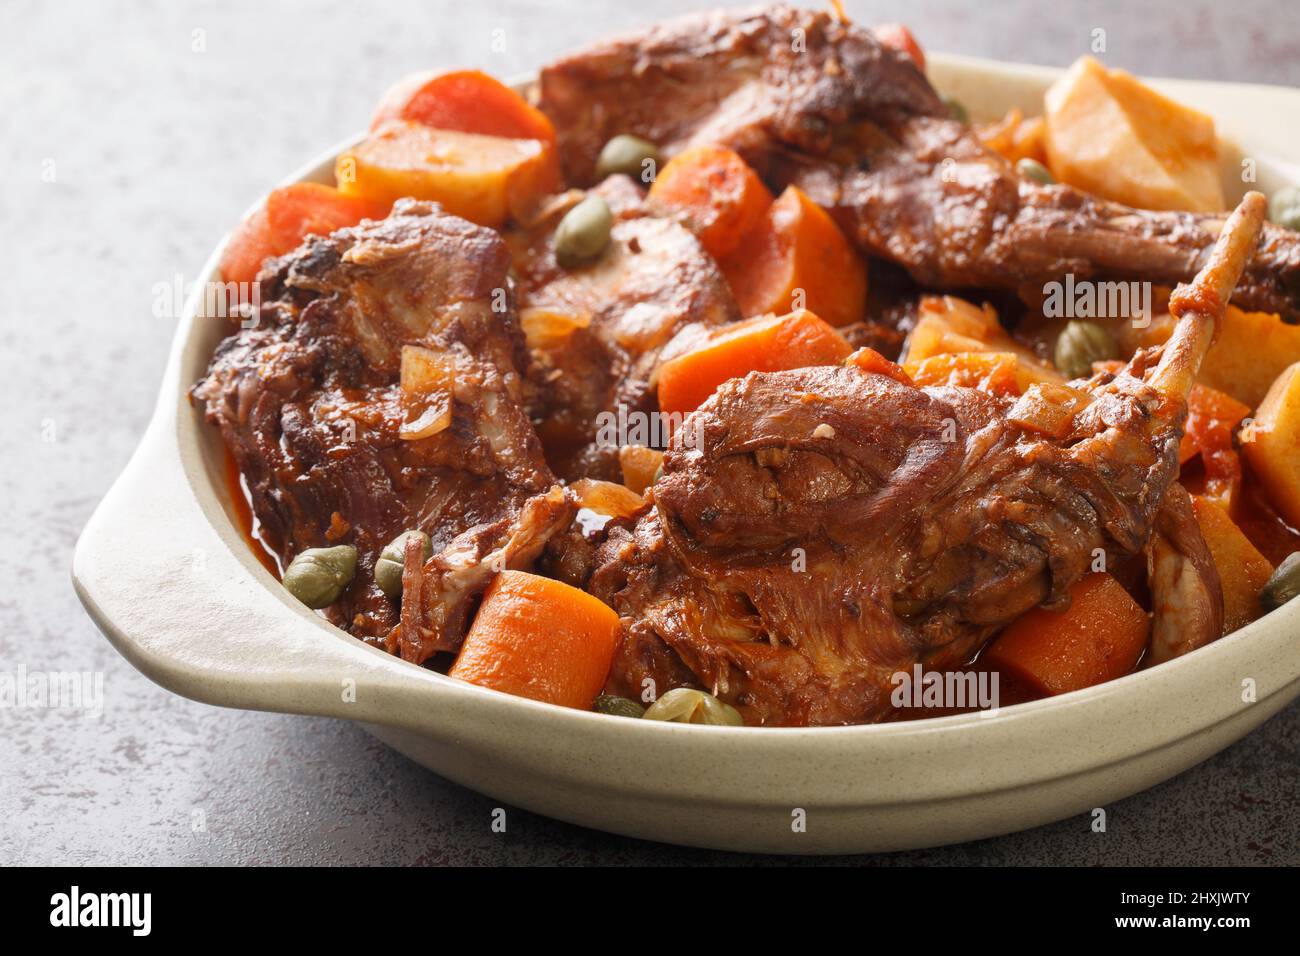 Fenkata dish of national Maltese cuisine cooked from rabbit meat with vegetables and gravy close-up in a saucepan on the table. horizontal Stock Photo